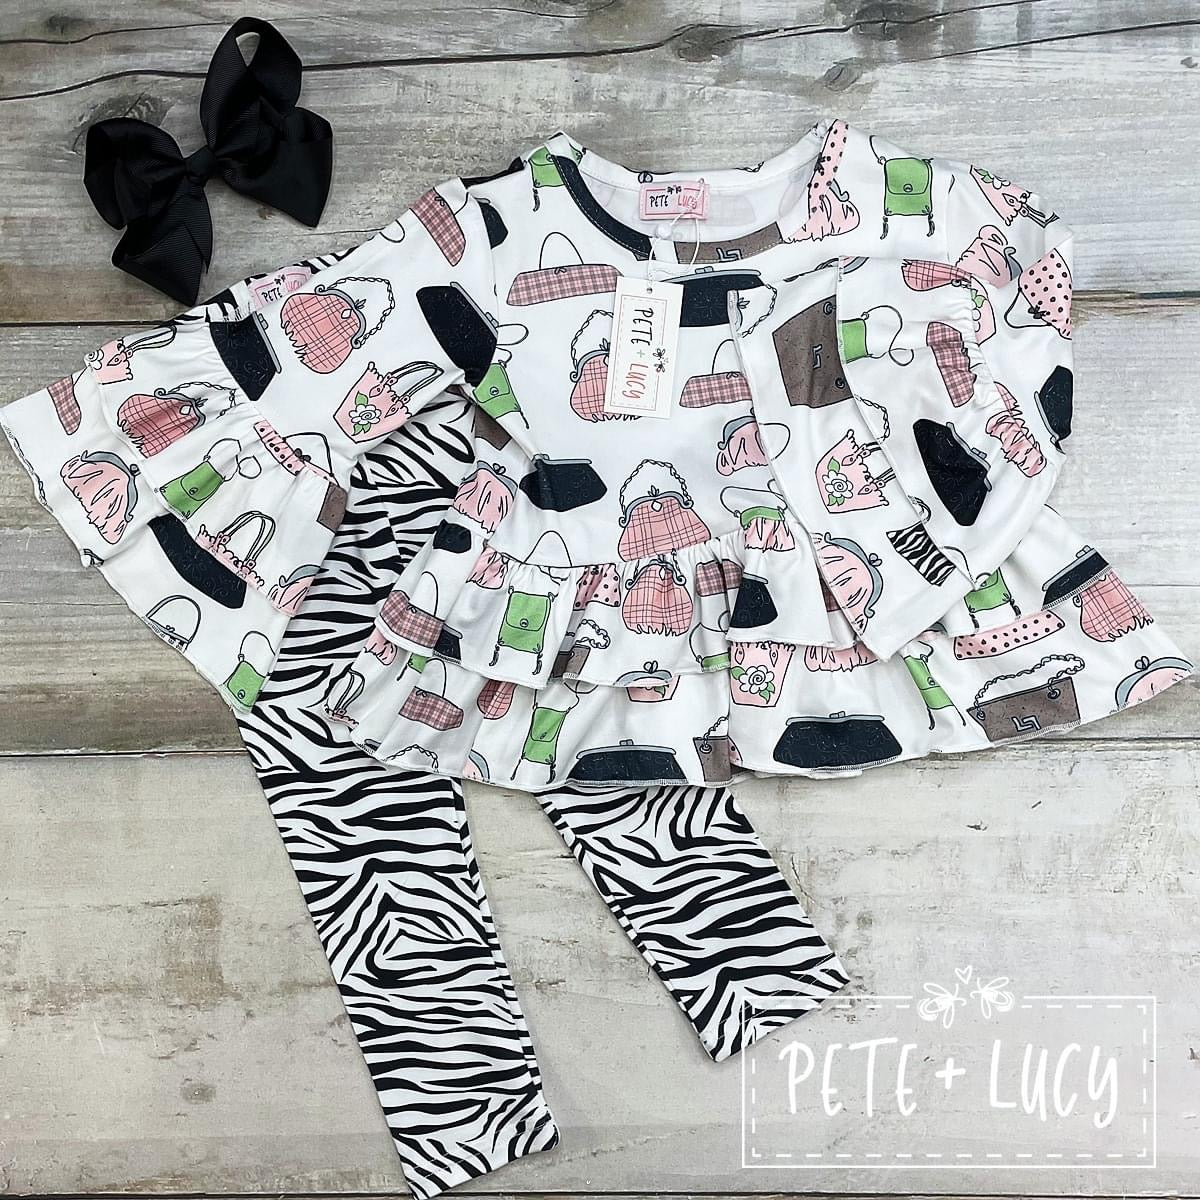 Serendipity's Closet Pete and Lucy shopping bag pant set